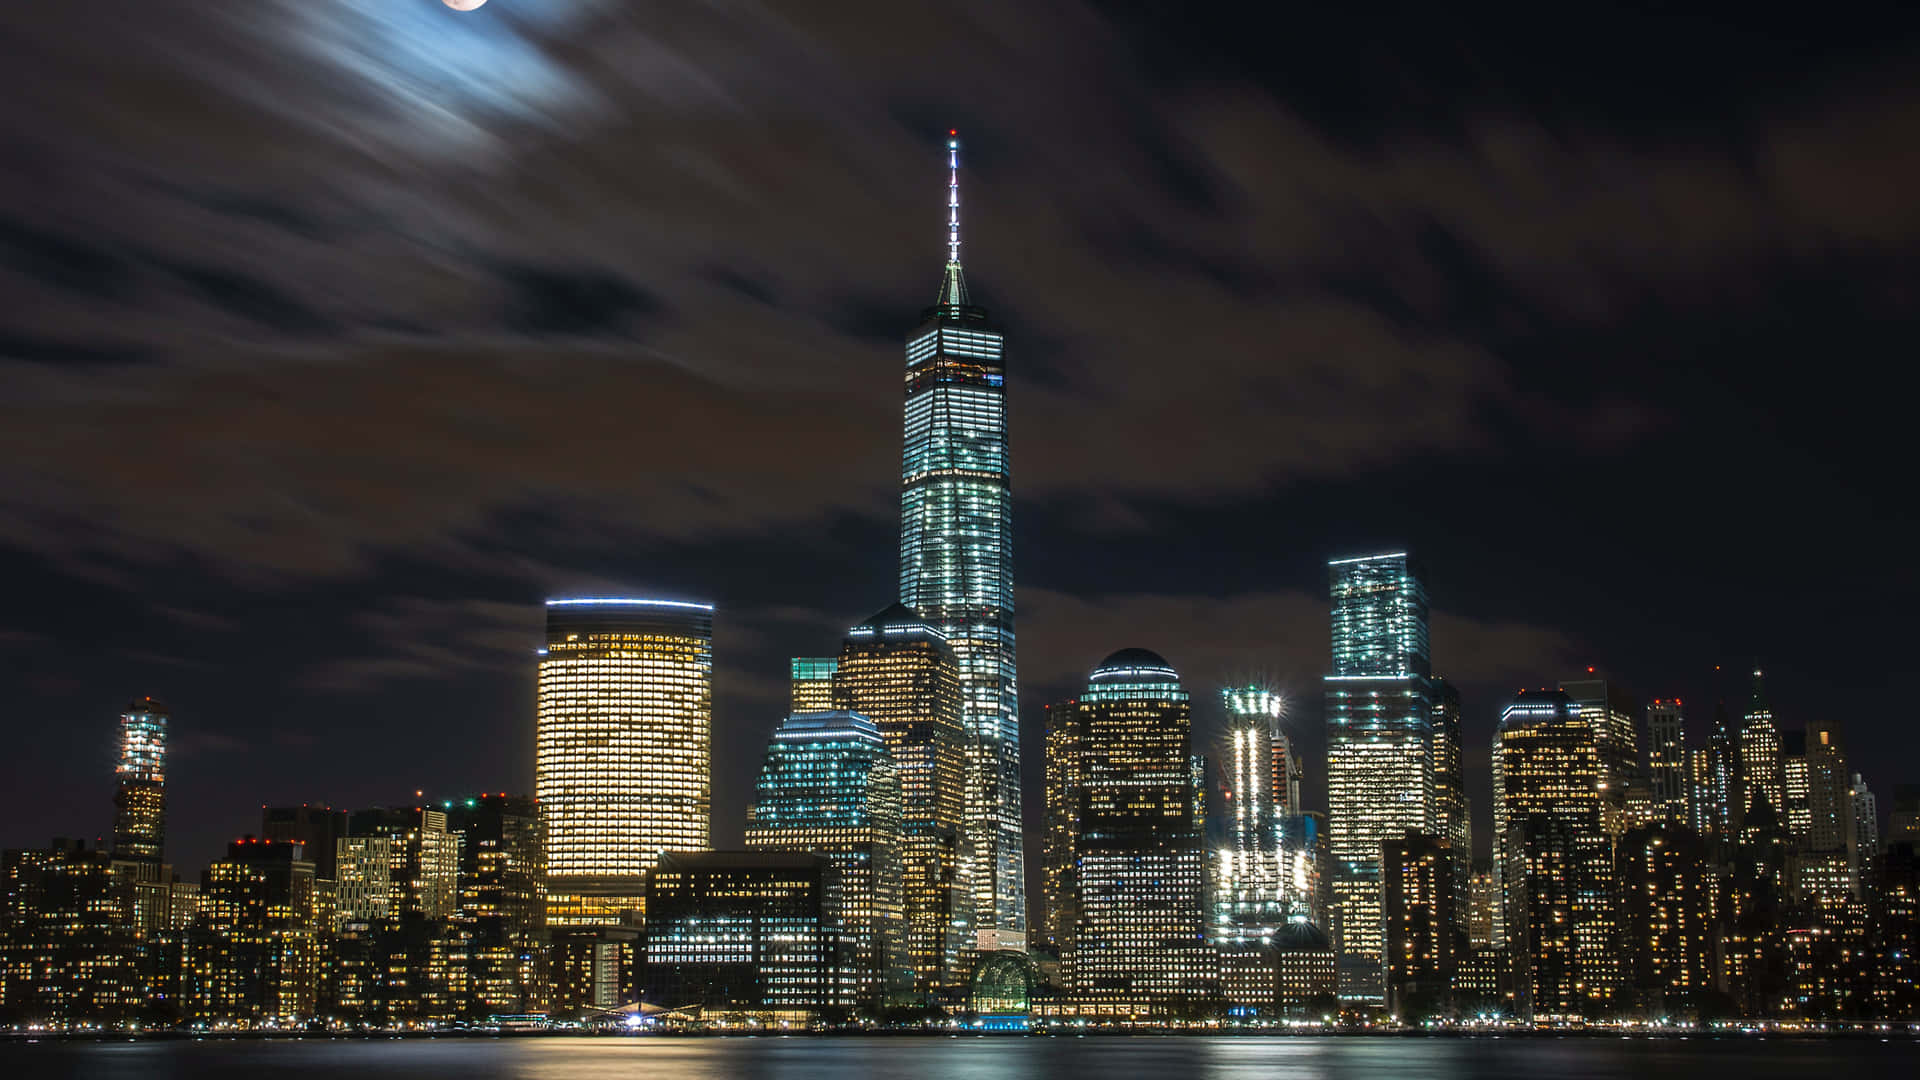 Take in the breathtaking beauty of New York City at night Wallpaper